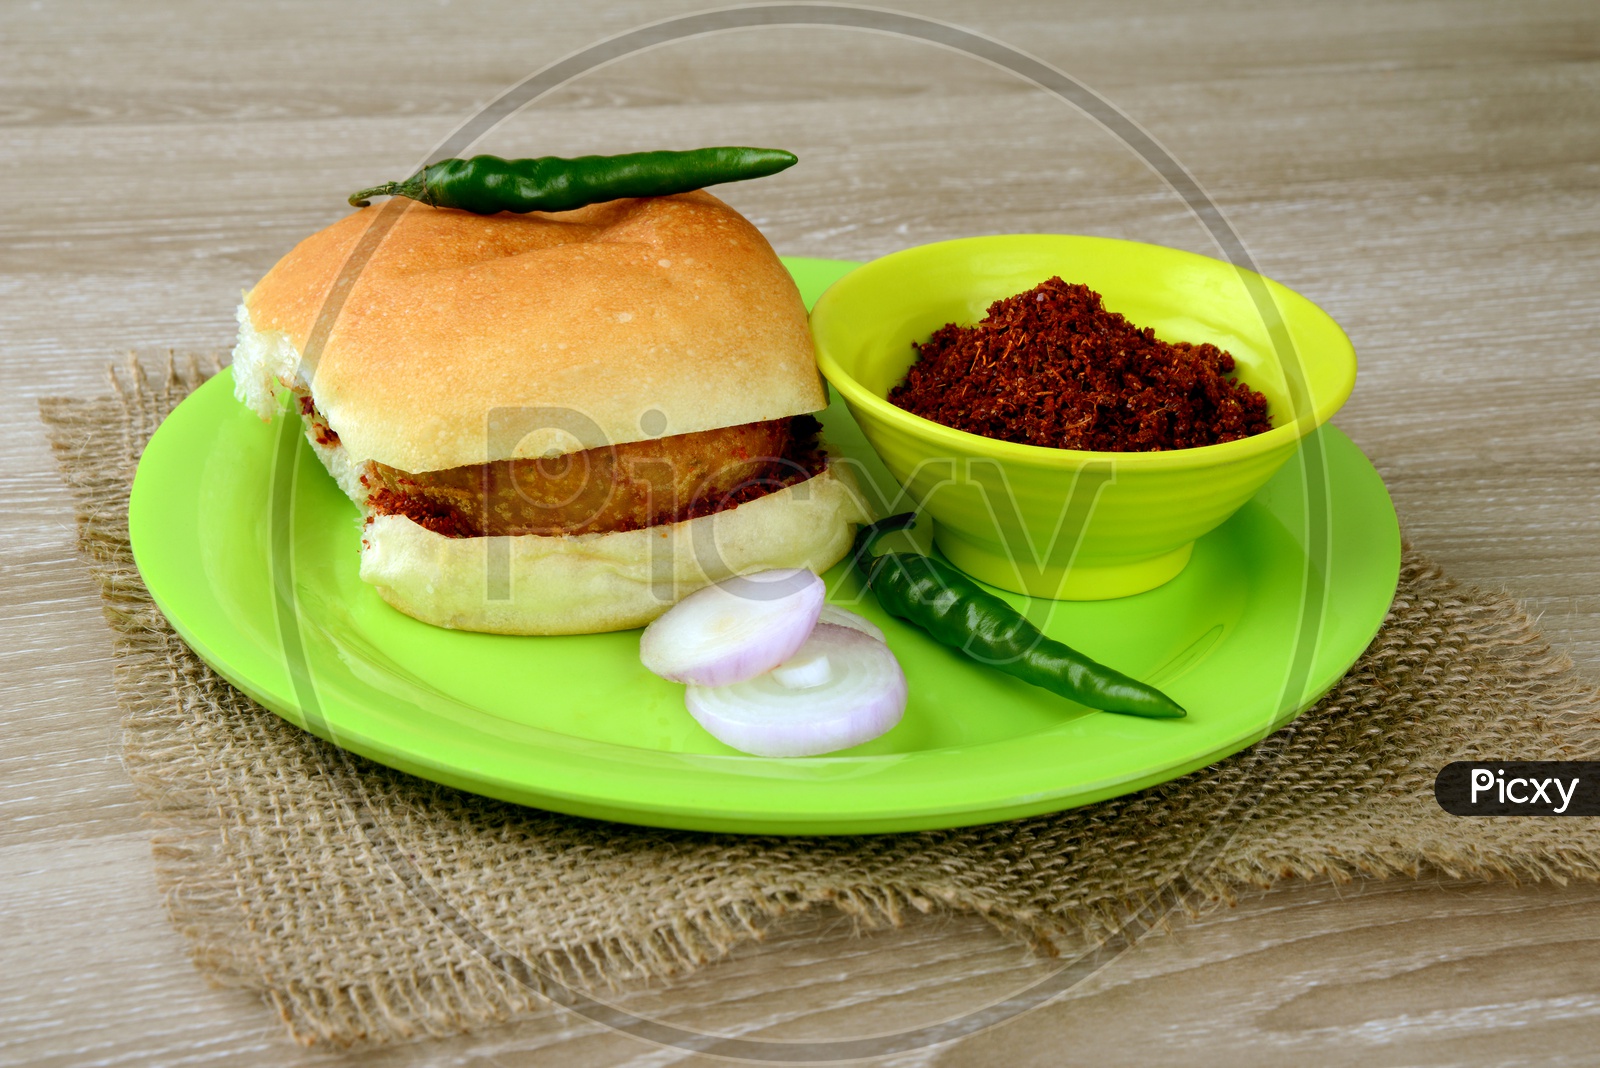 Vada pav with chutney, chilly and onion slices